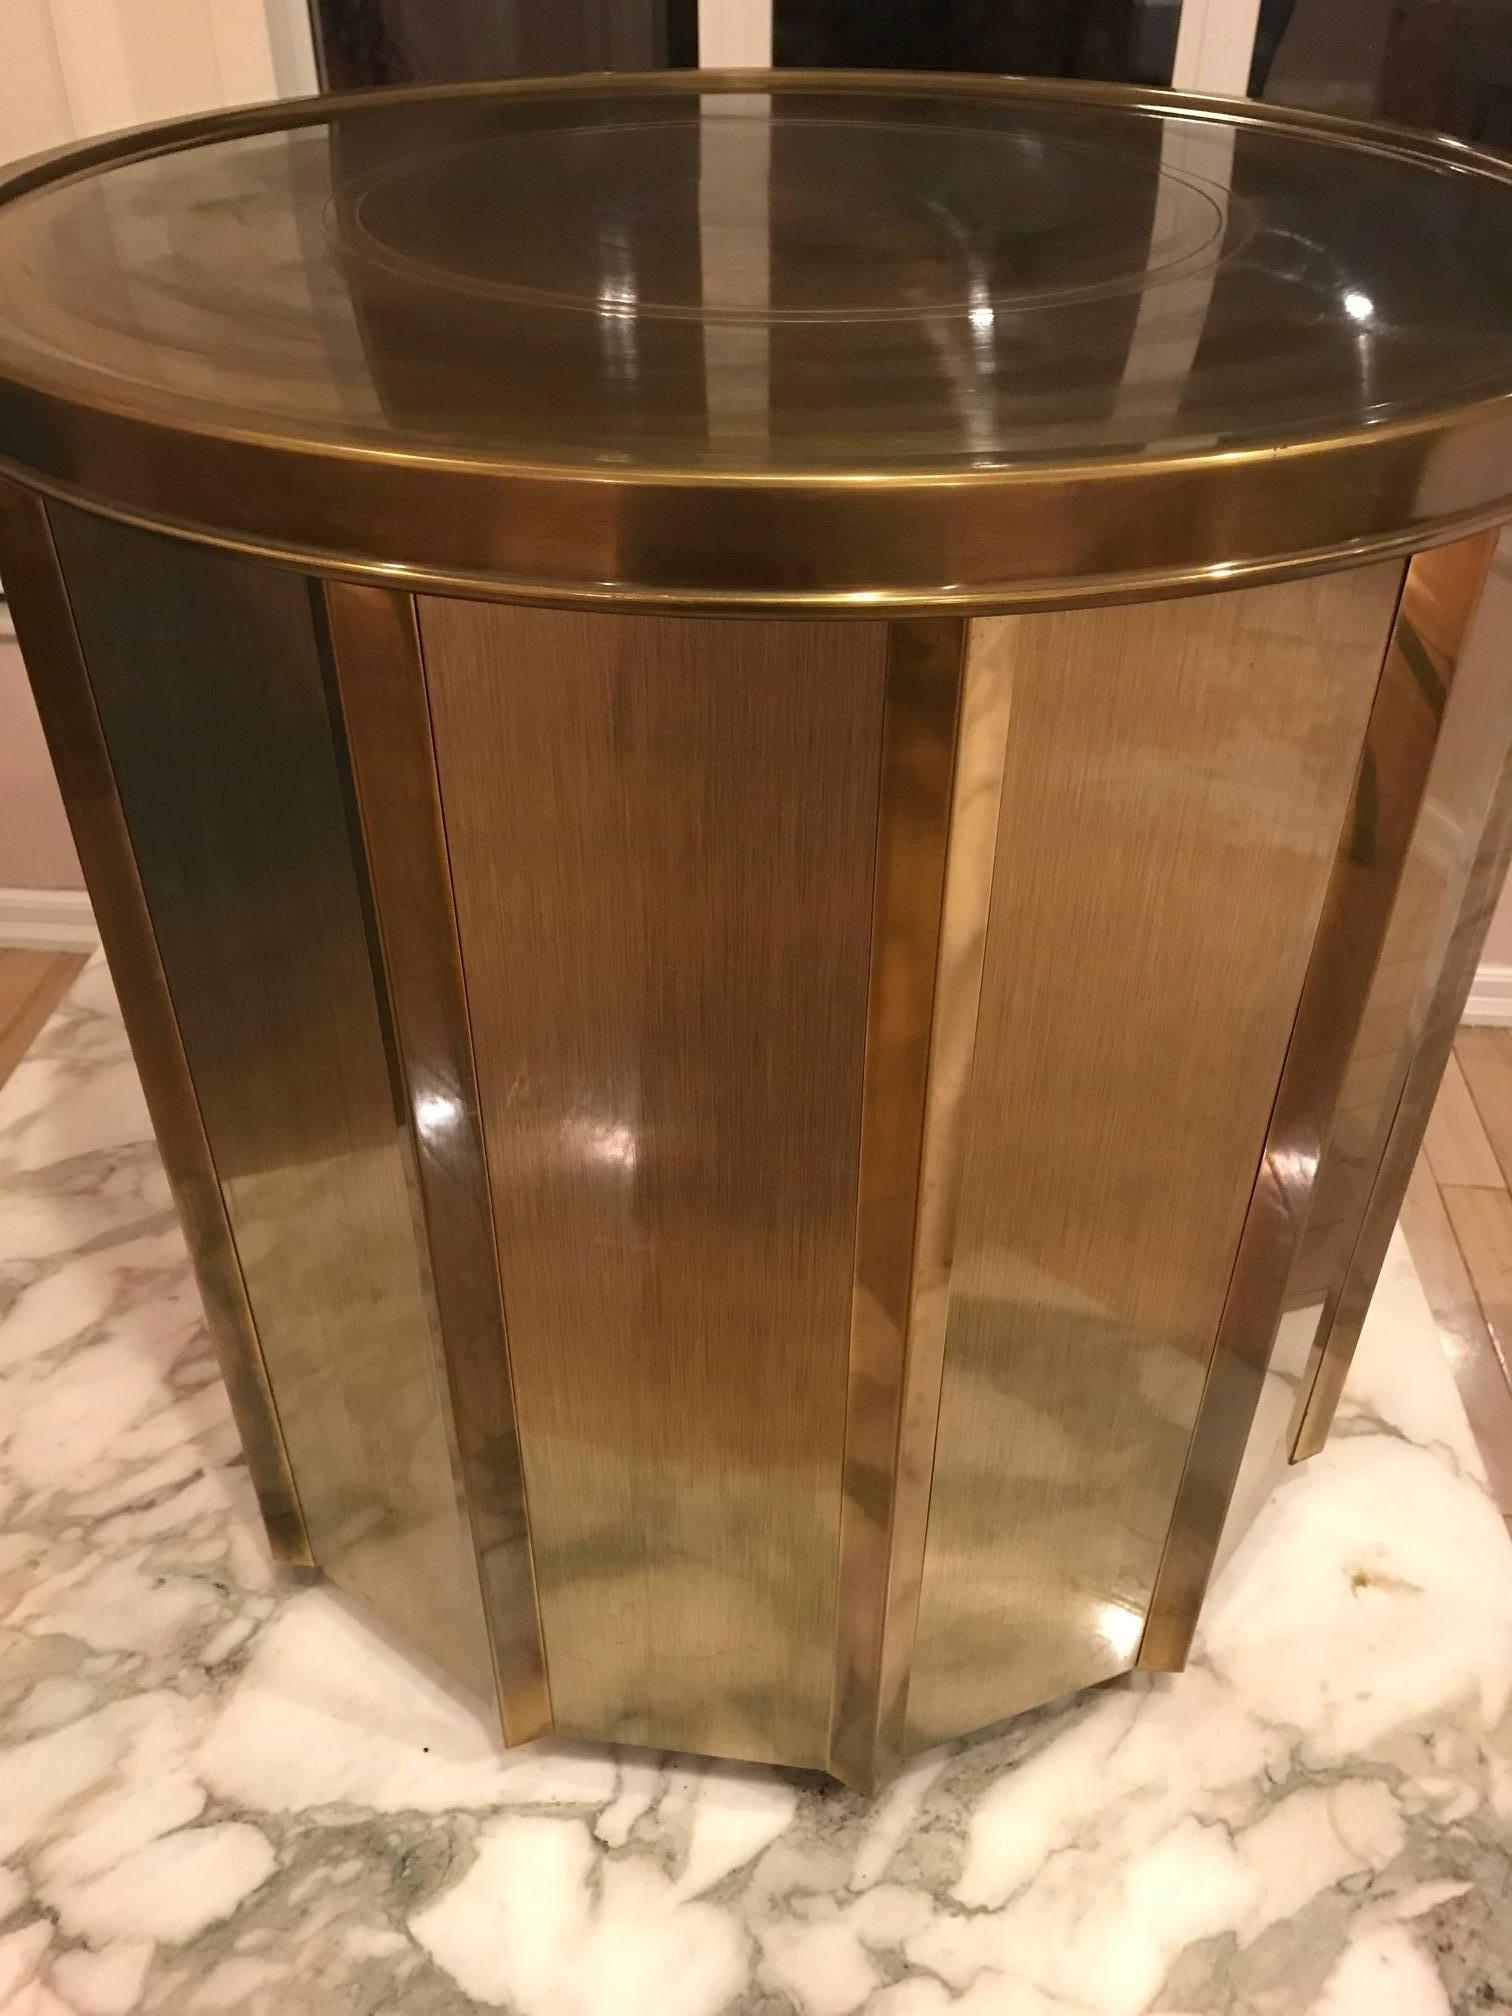 Brass dining table base in original condition with original finish, circa 1970s. This can hold a large circular glass top of substantial weight. Elegant classic and rich warm brass patina.